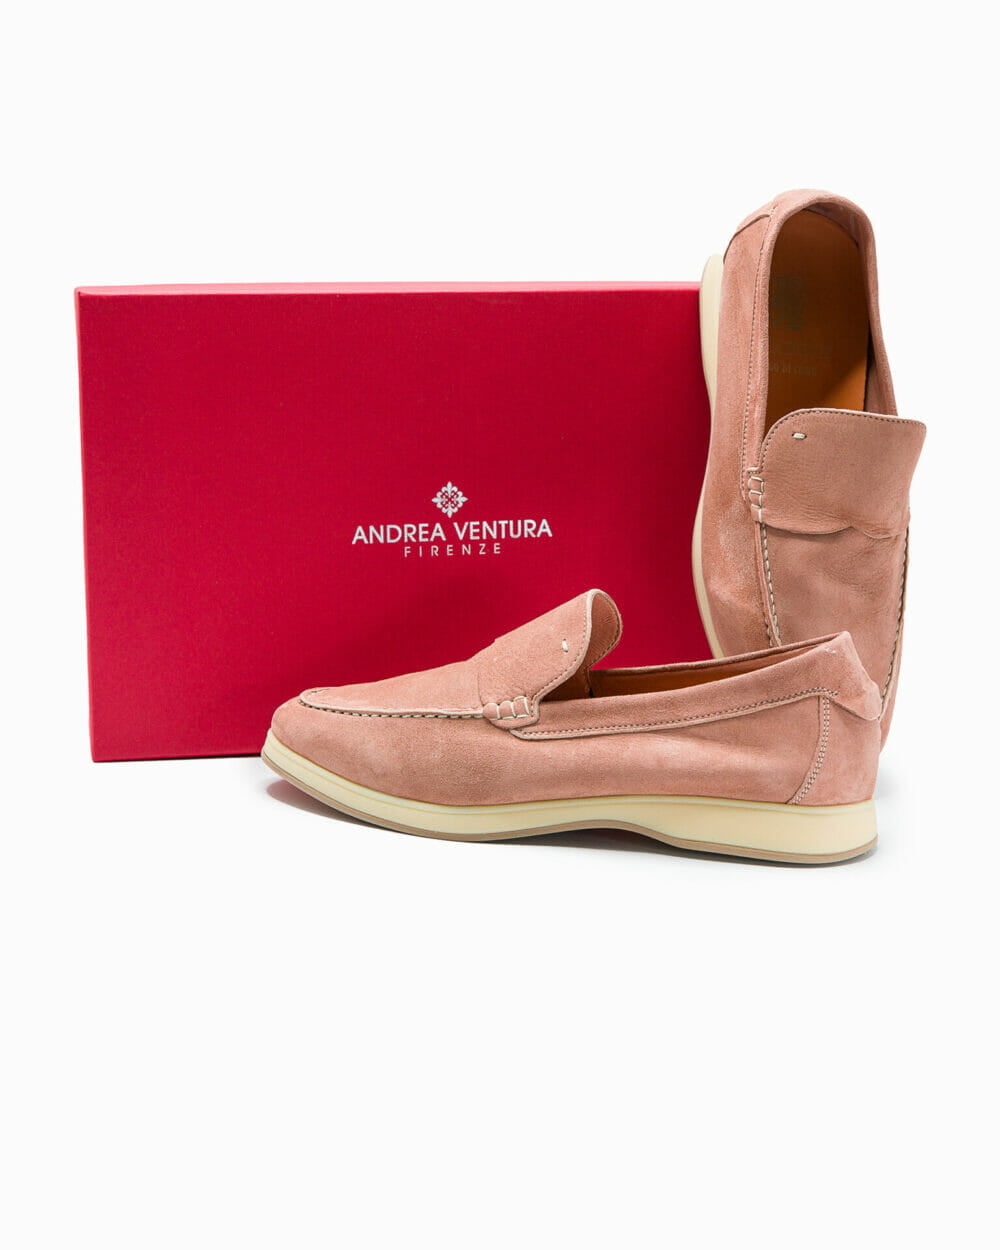 Aq-D-90-rose-poudre-suede-packaging